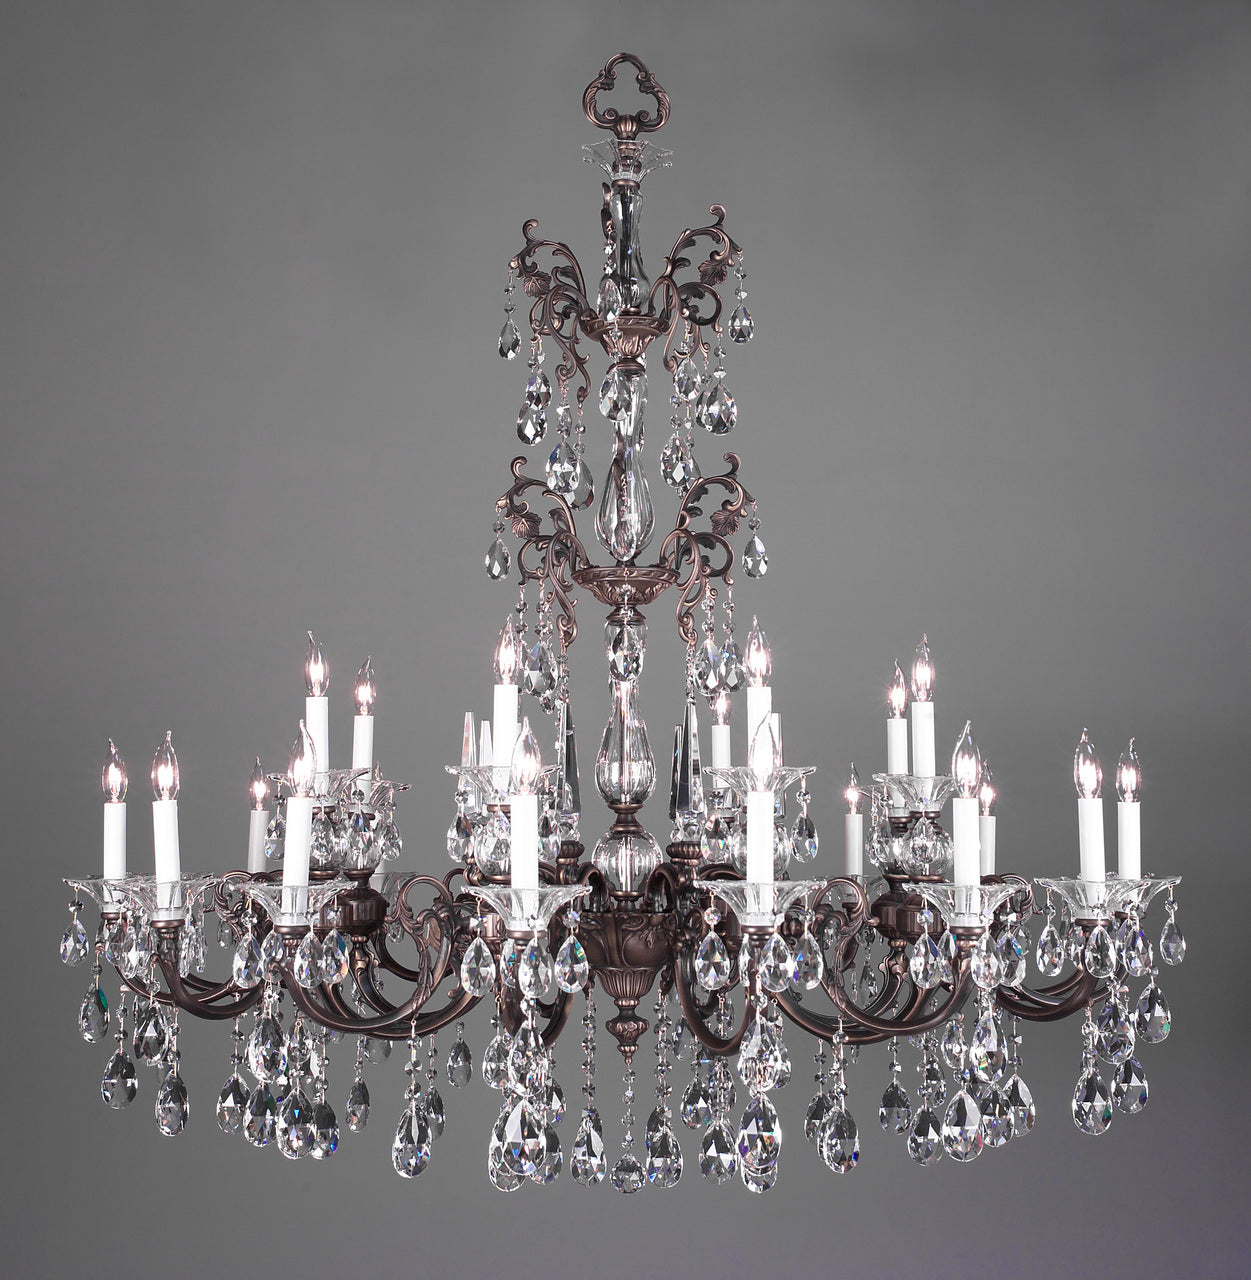 Classic Lighting 57065 SS SJT Via Lombardi Crystal Chandelier in Silverstone (Imported from Spain)